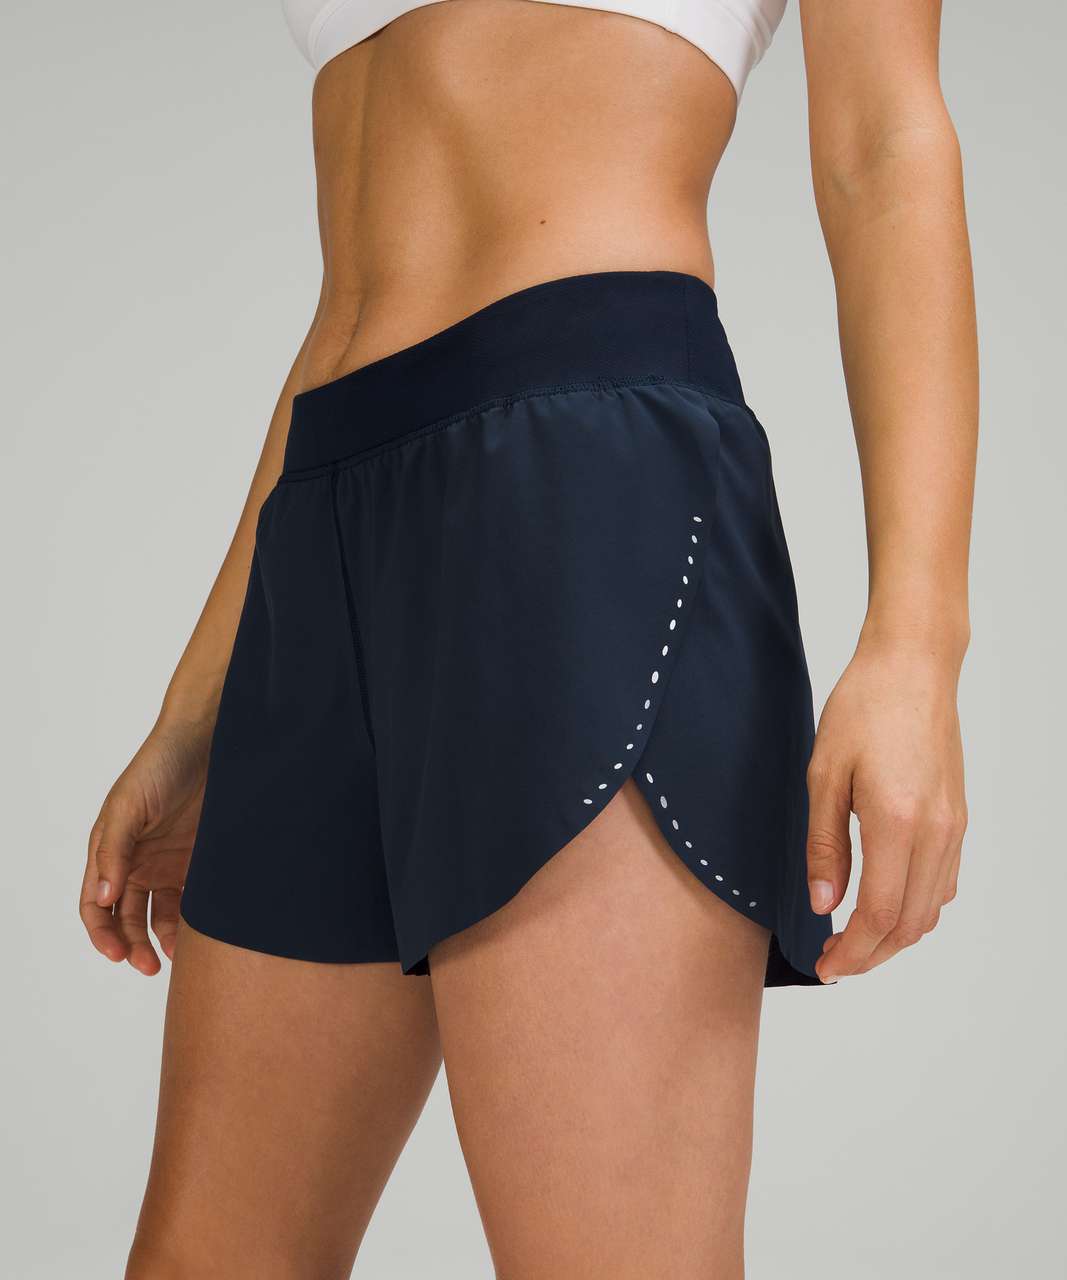 Lululemon Find Your Pace Lined High-Rise Short 3" - True Navy